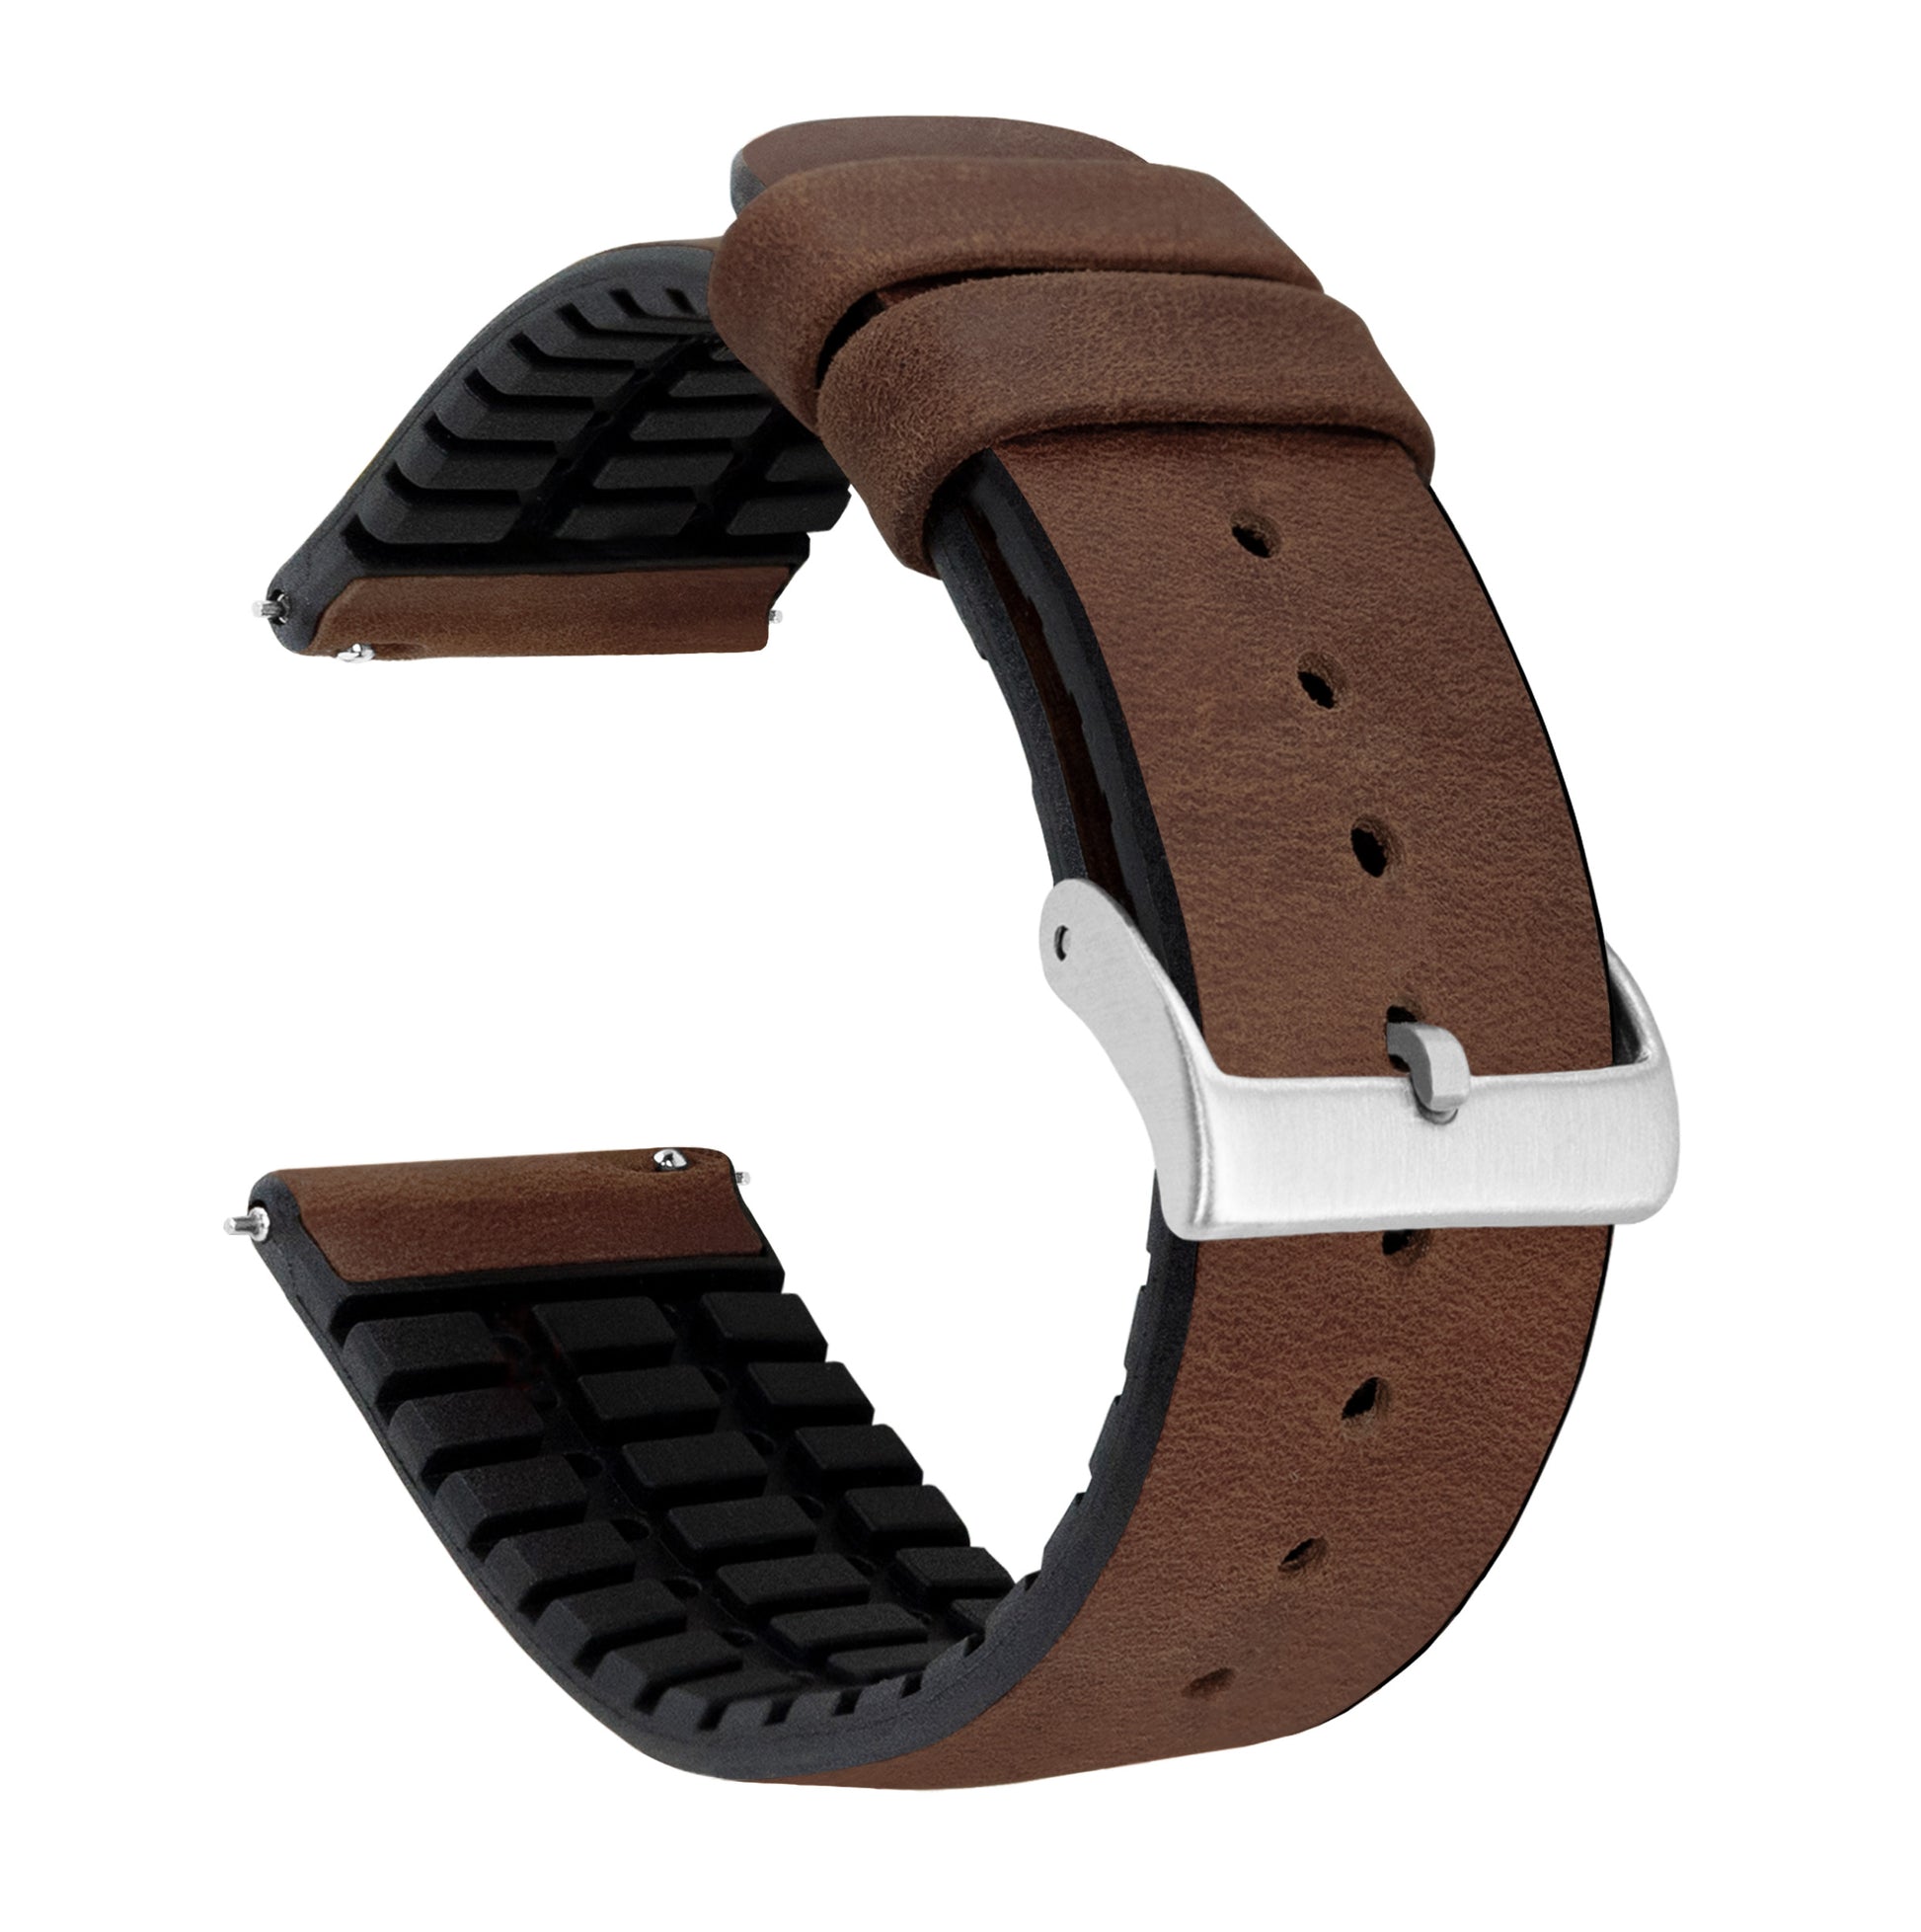 Samsung Galaxy Watch Active | Leather and Rubber Hybrid | Walnut Brown - Barton Watch Bands